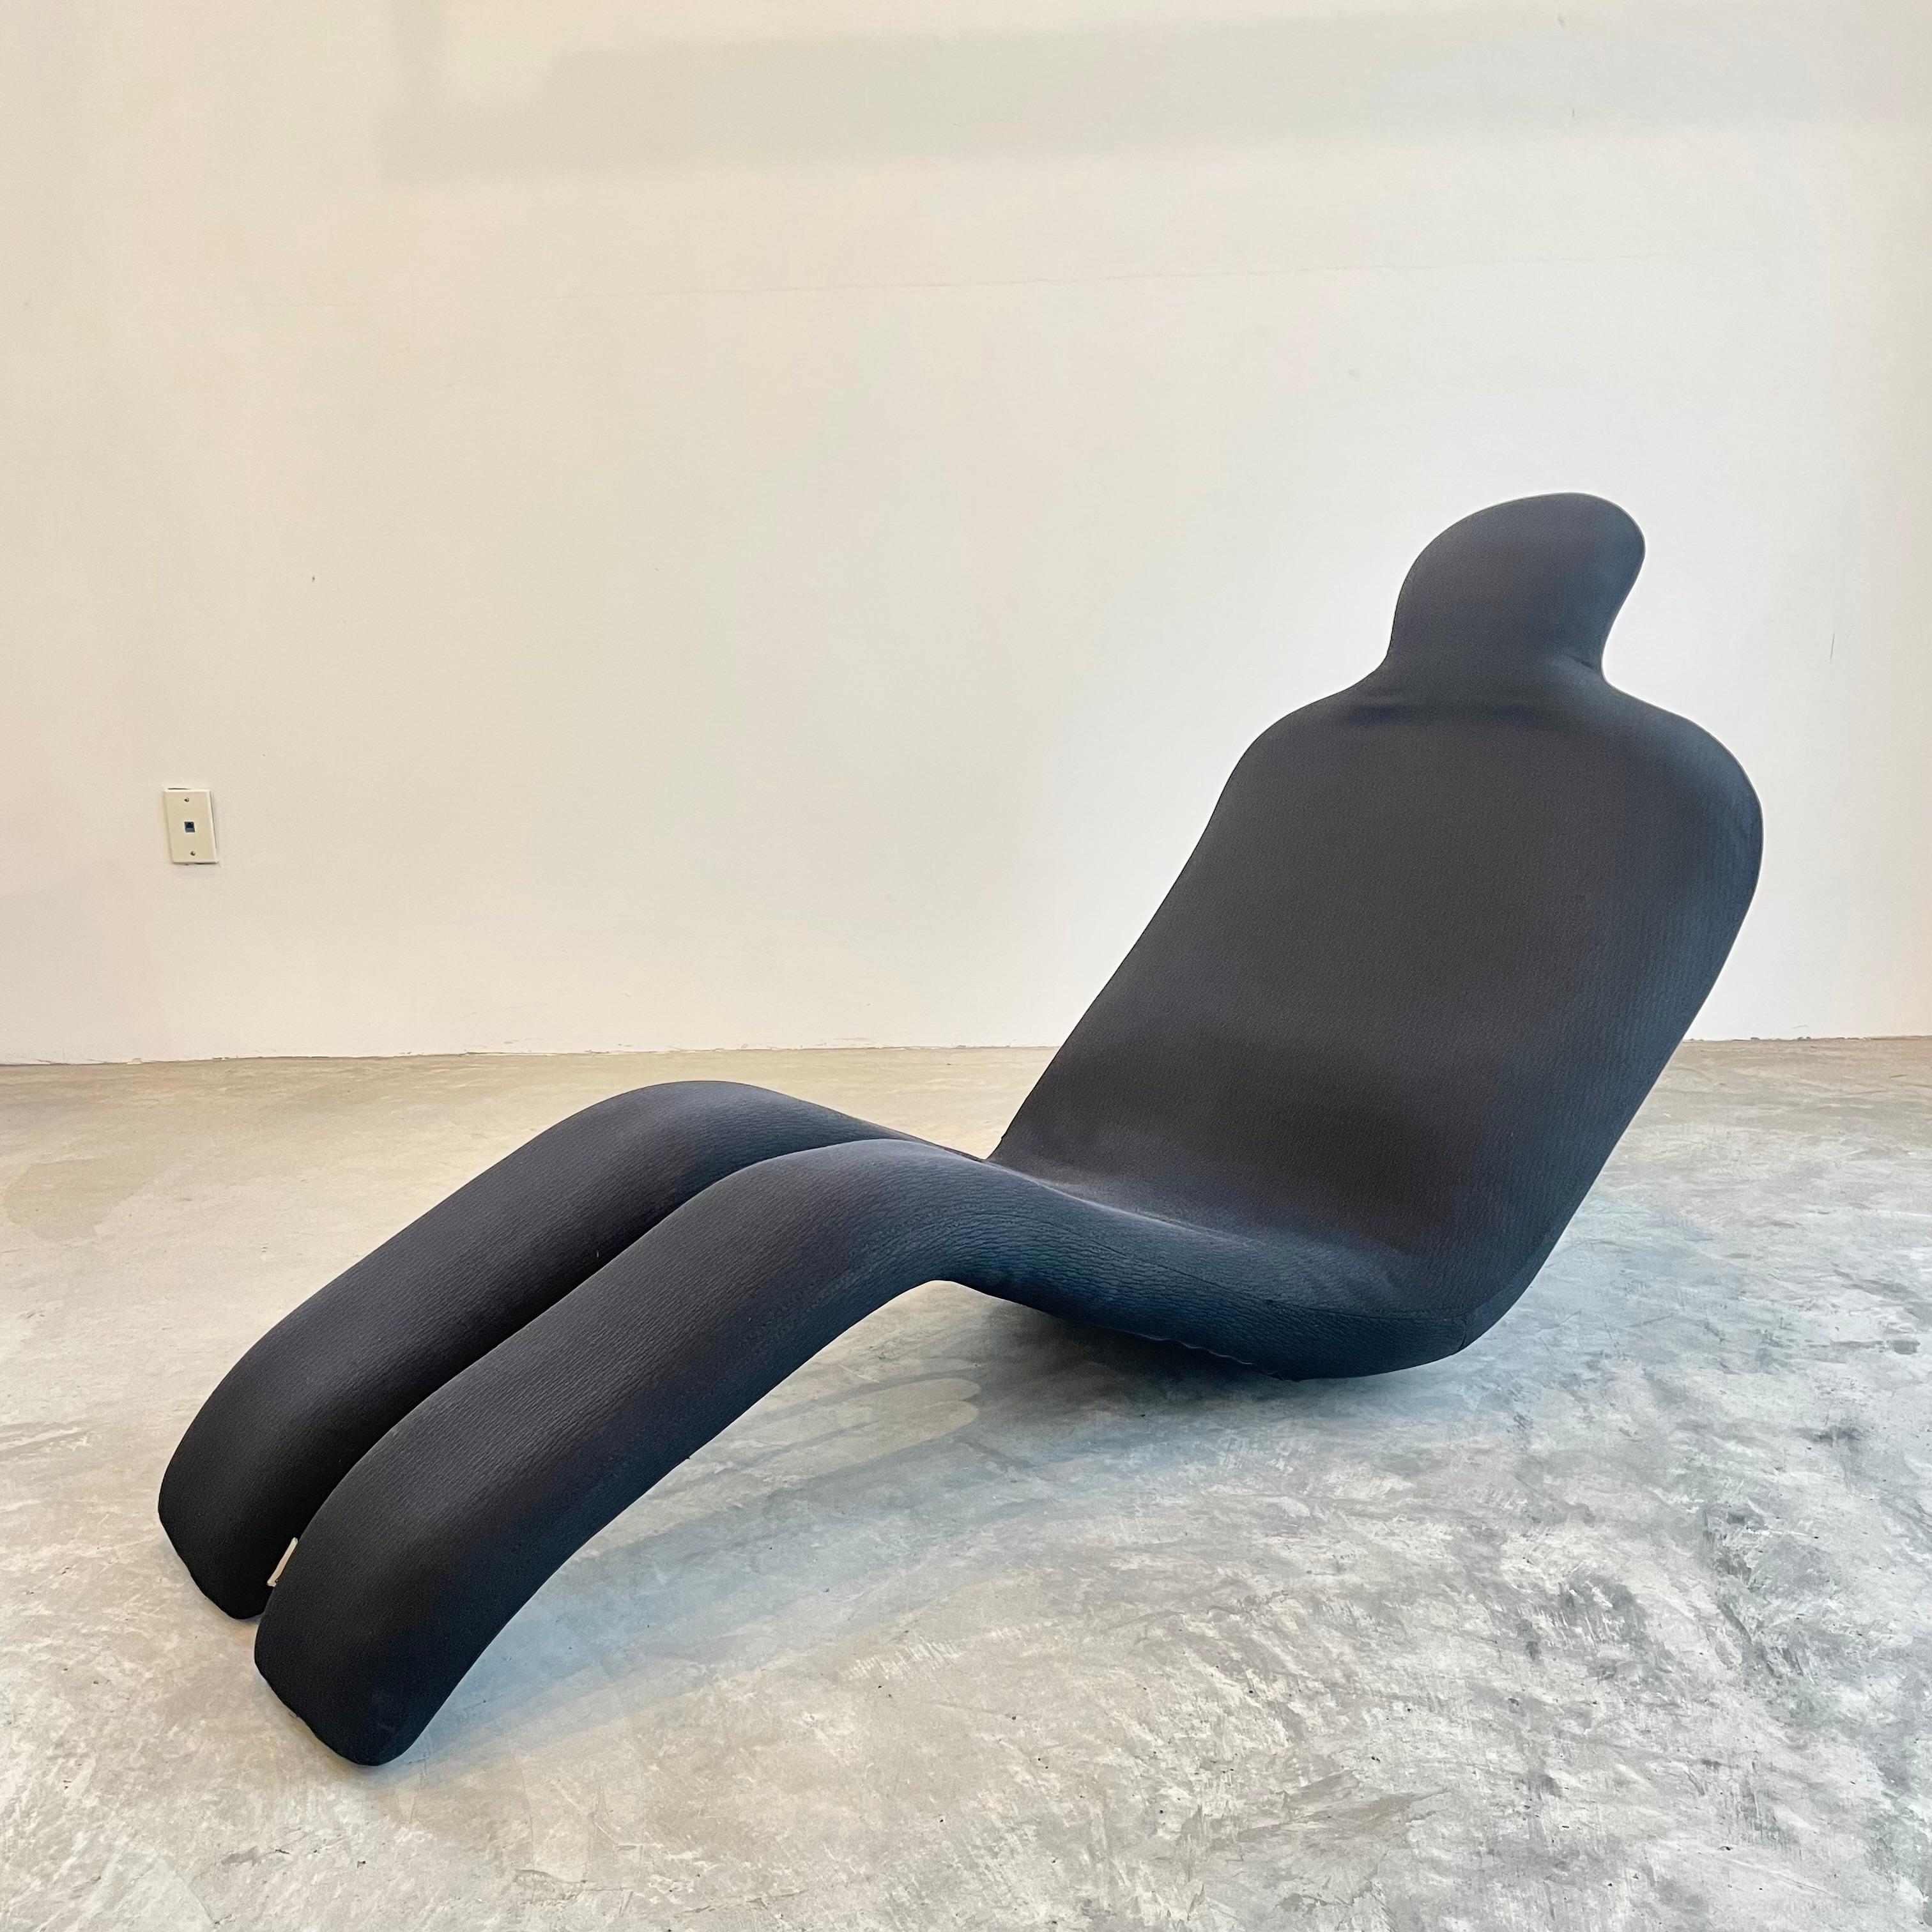 Sleek chaise lounge chair by Olivier Mourgue. Made in France, 1970s. Black fabric in good vintage condition with some light fading. Presents extremely well. Great piece of usable art. Original Arconas label at the foot. Extremely